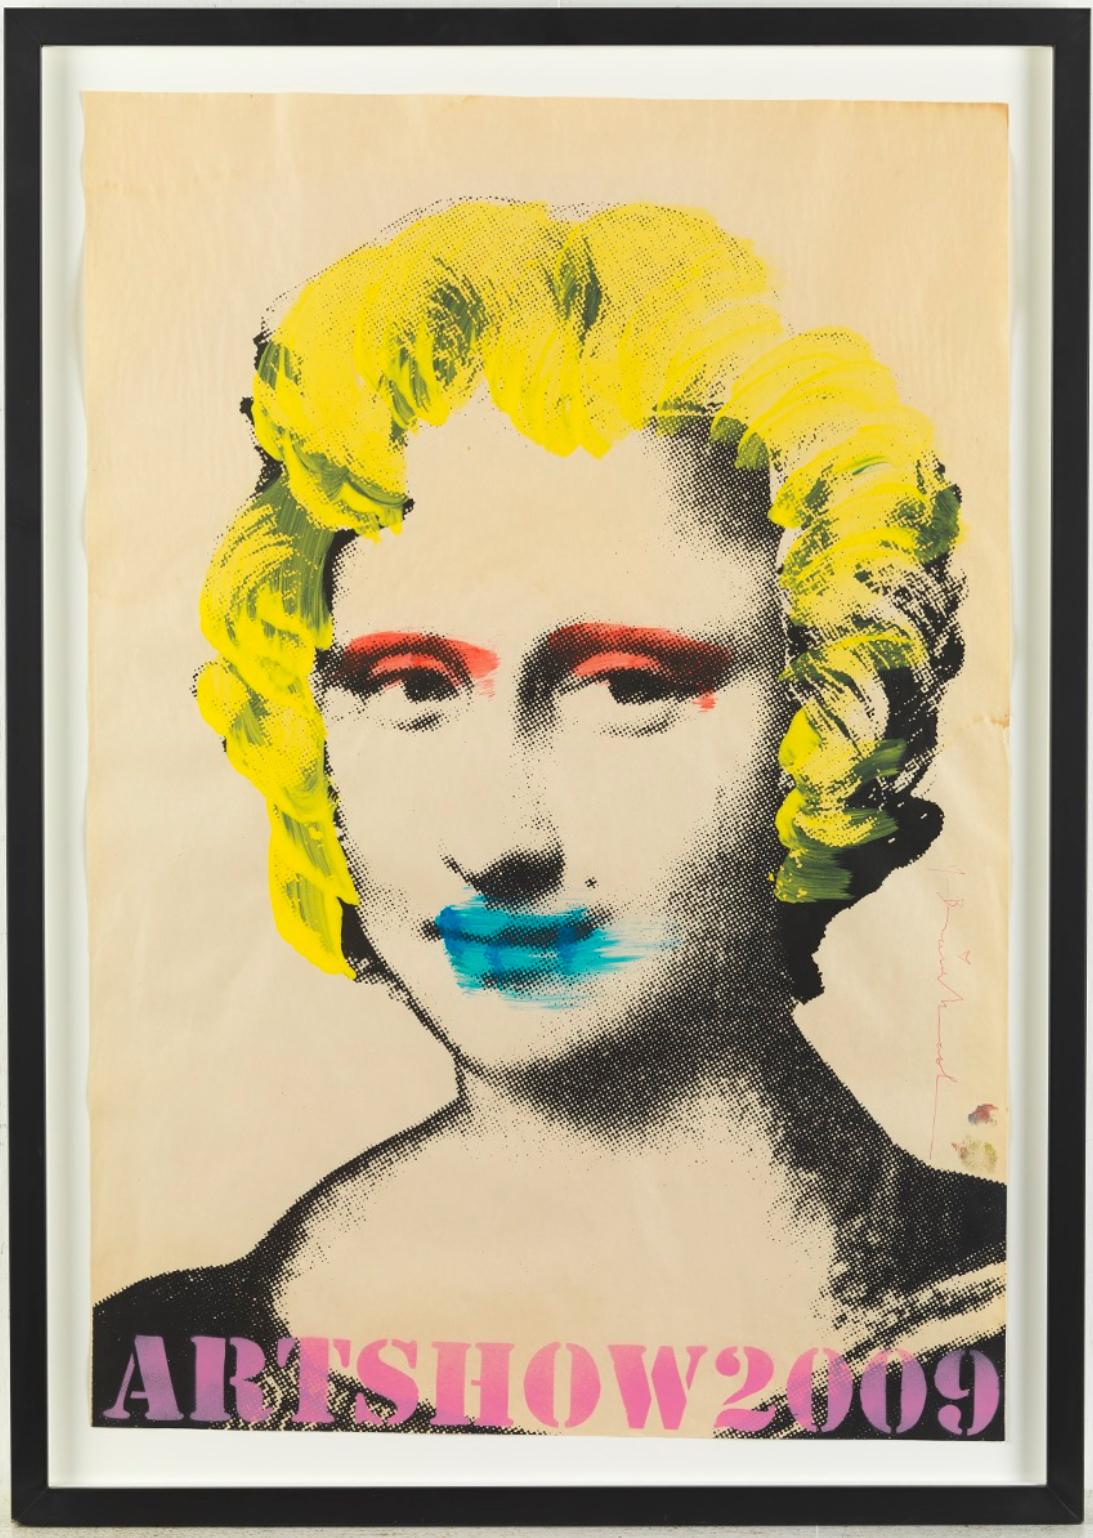 Mr. Brainwash (Thierry Guetta, French/American b. 1966) Mona Lisa, poster for Toronto art show 2009. Screenprint in colors with acrylic hand-embellishments on news print paper, signed in pen right edge with thumb print, float mount under glass in